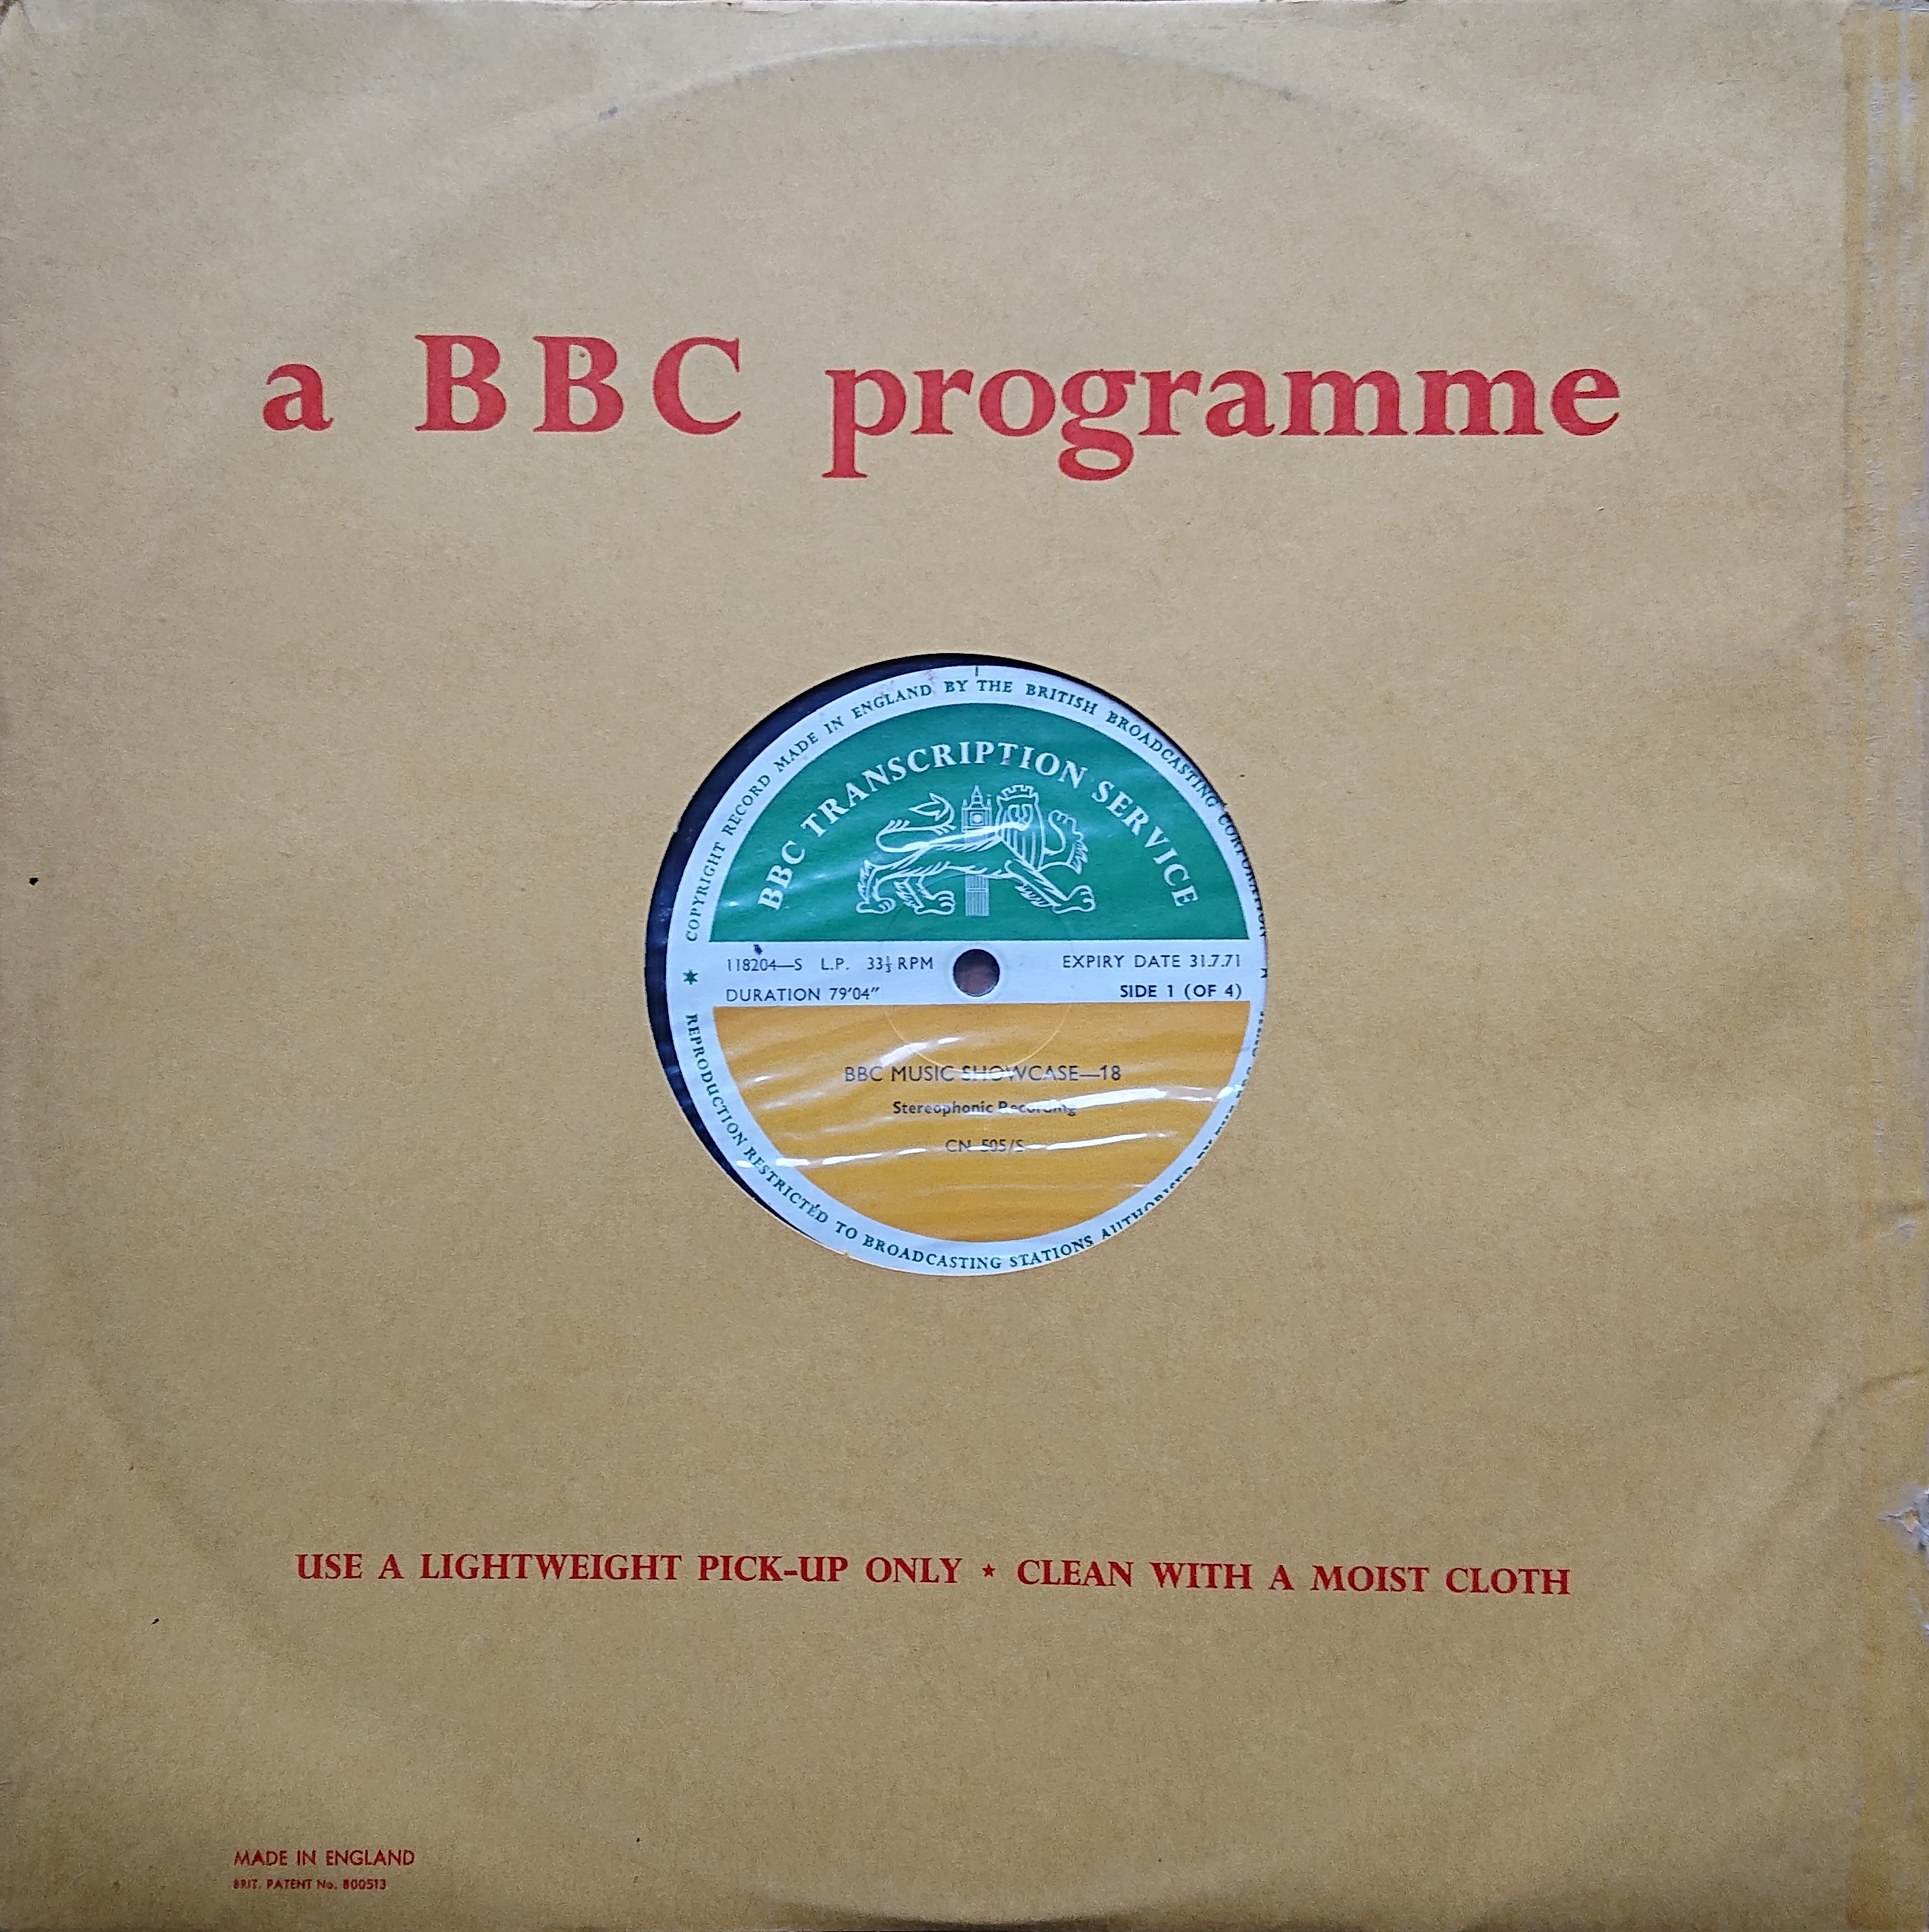 Picture of CN 505 S 35 BBC music showcase - 18 (Sides 1 & 3) by artist Various from the BBC albums - Records and Tapes library